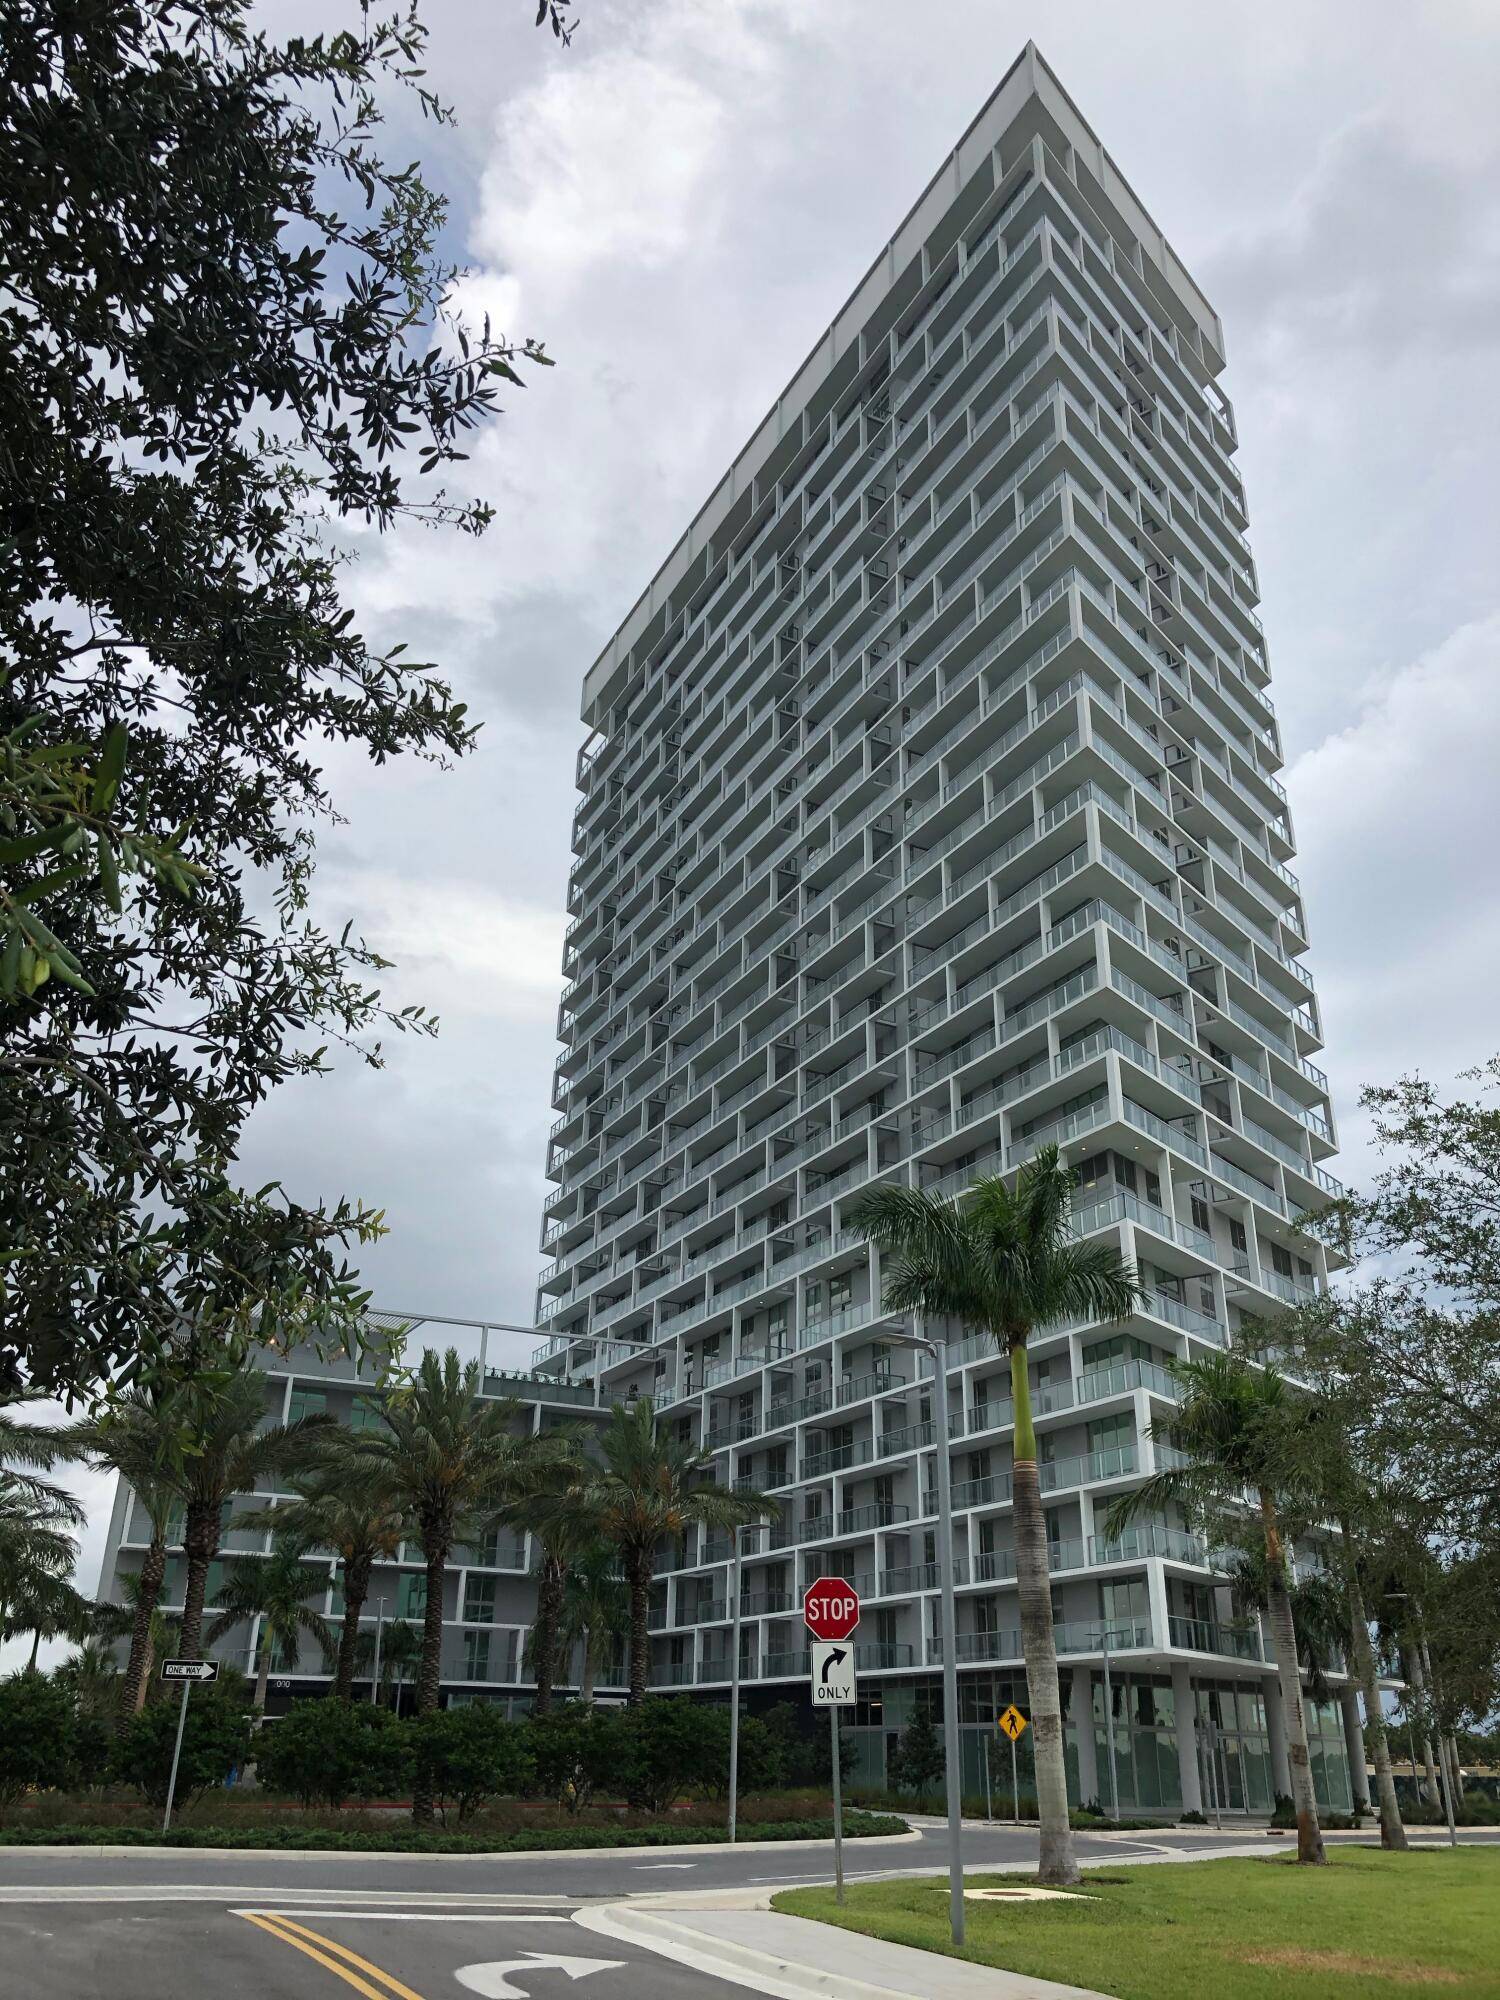 Magnificent corner unit with amazing views, huge balcony 436 sqft wrap around, stainless steel appliances, automatic blinds, ceiling fans, porcelain flooring, 2 assigned parking spaces valet parking also available, concierge, ...